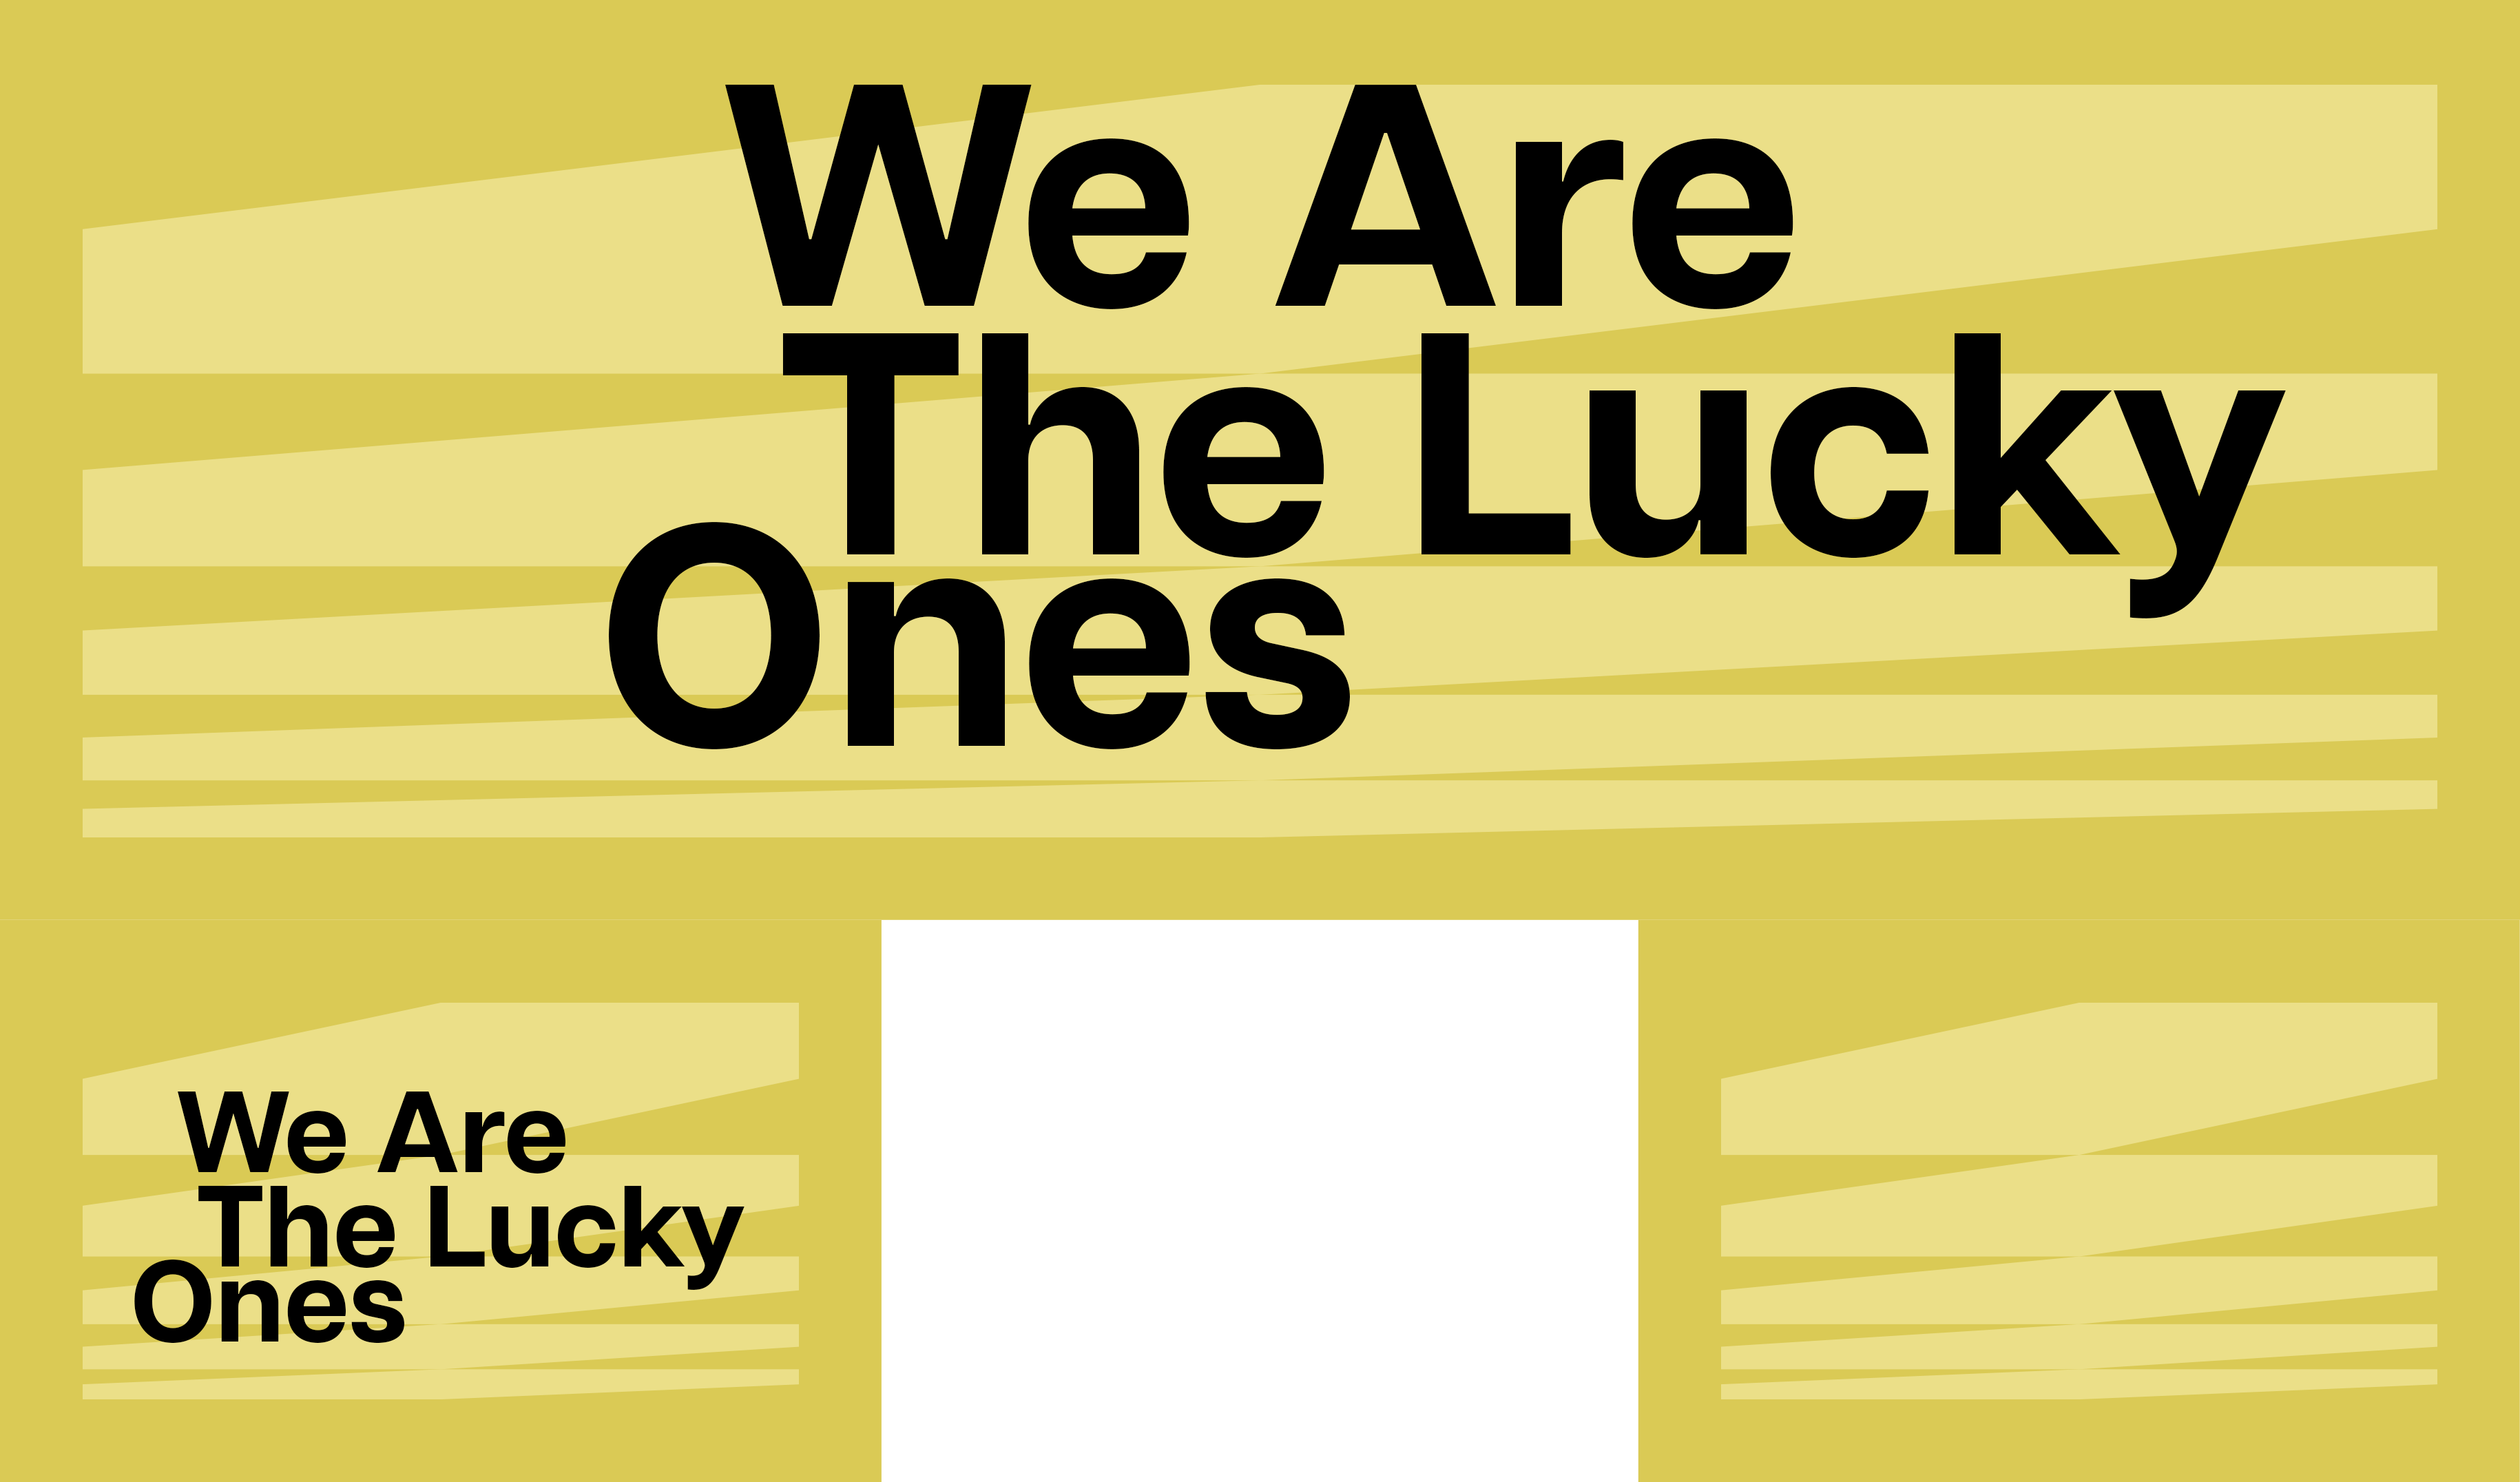 We are the lucky ones